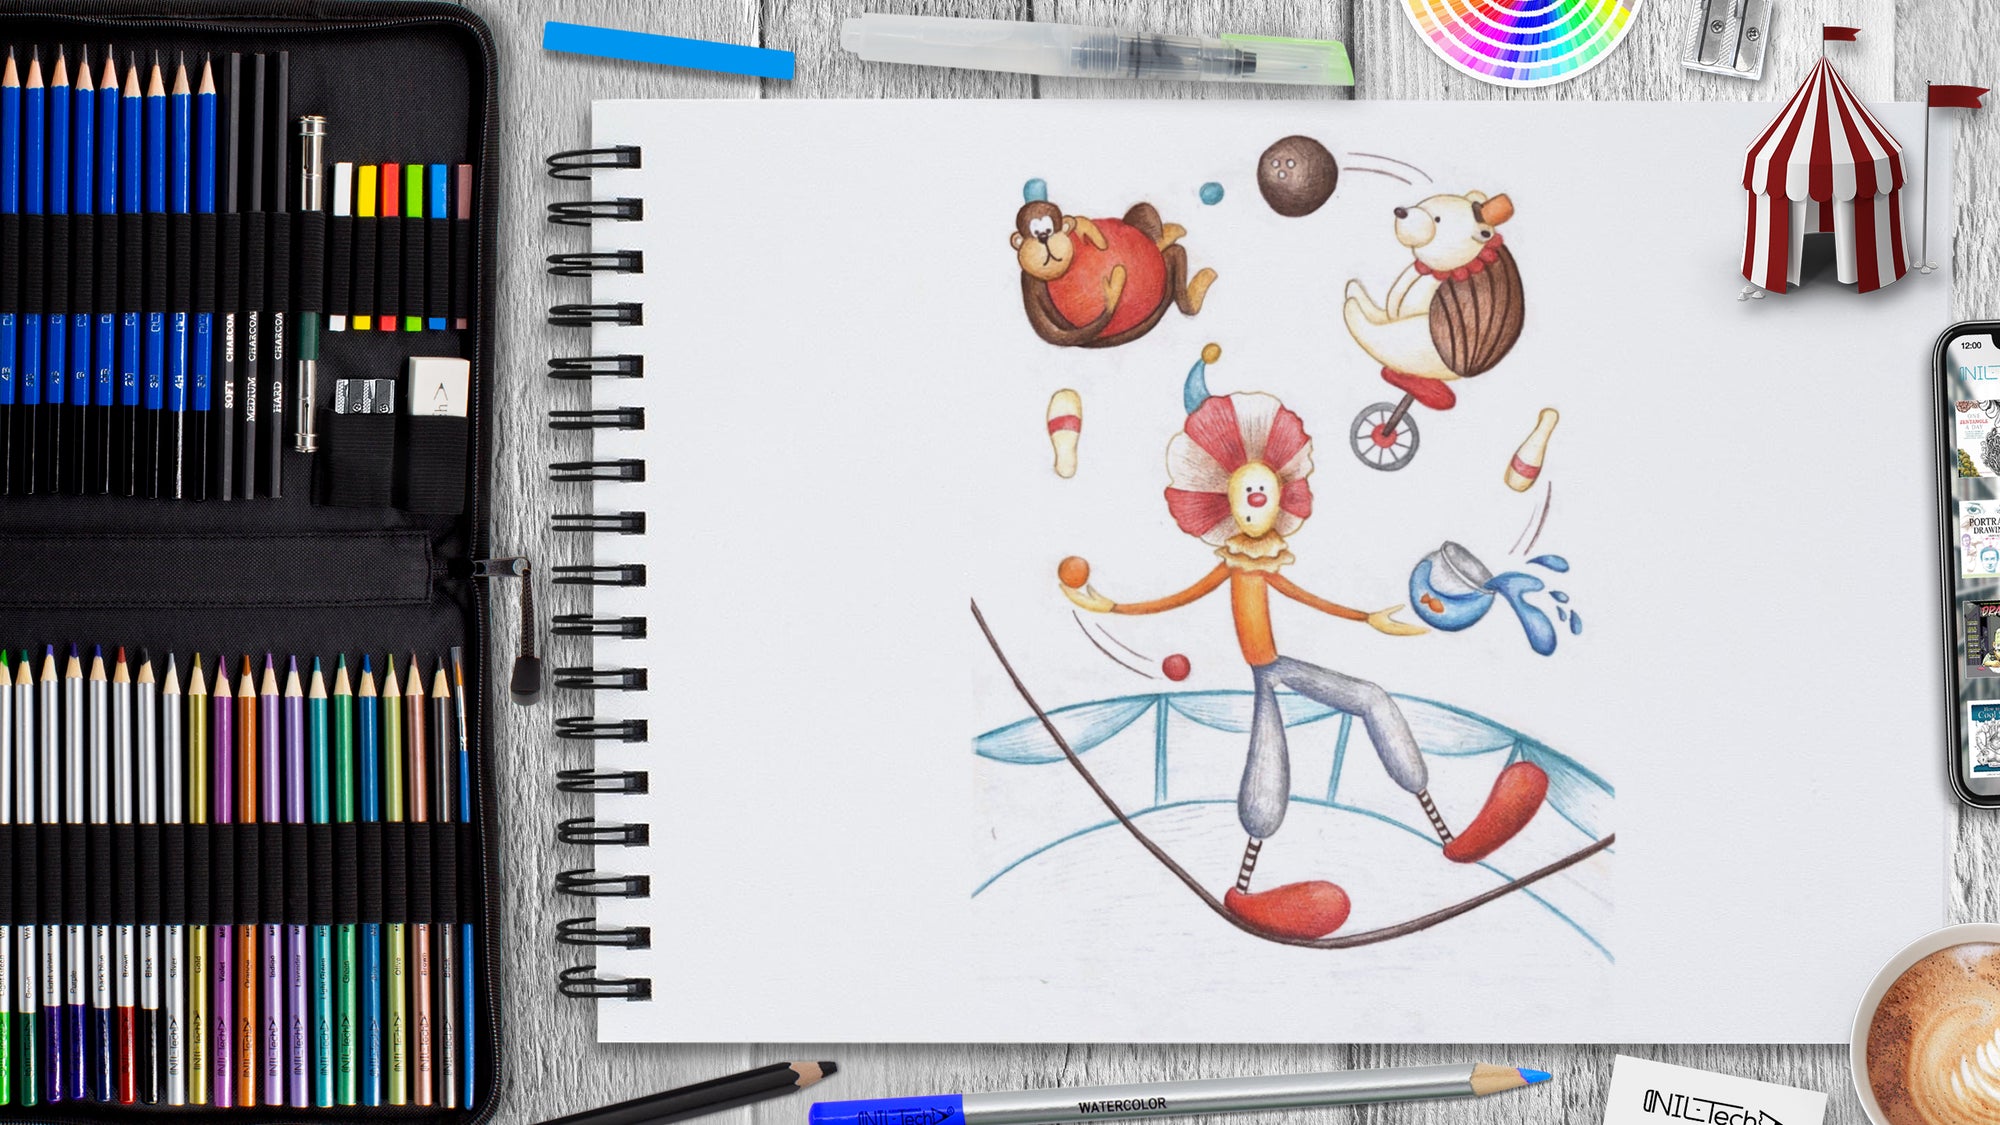 How to Draw Clown: World Circus Day